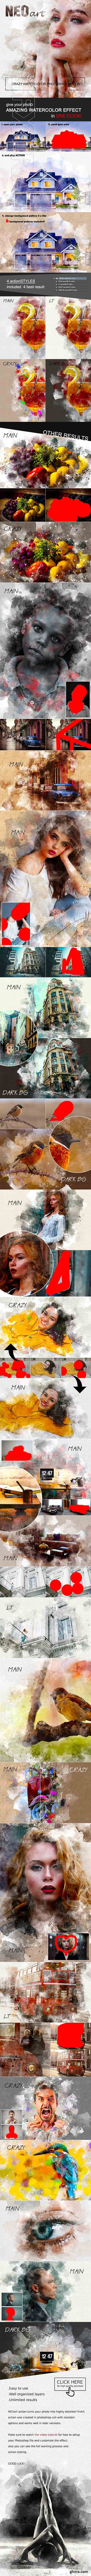 GraphicRiver - NEOart crazy watercolor PS action 21649734